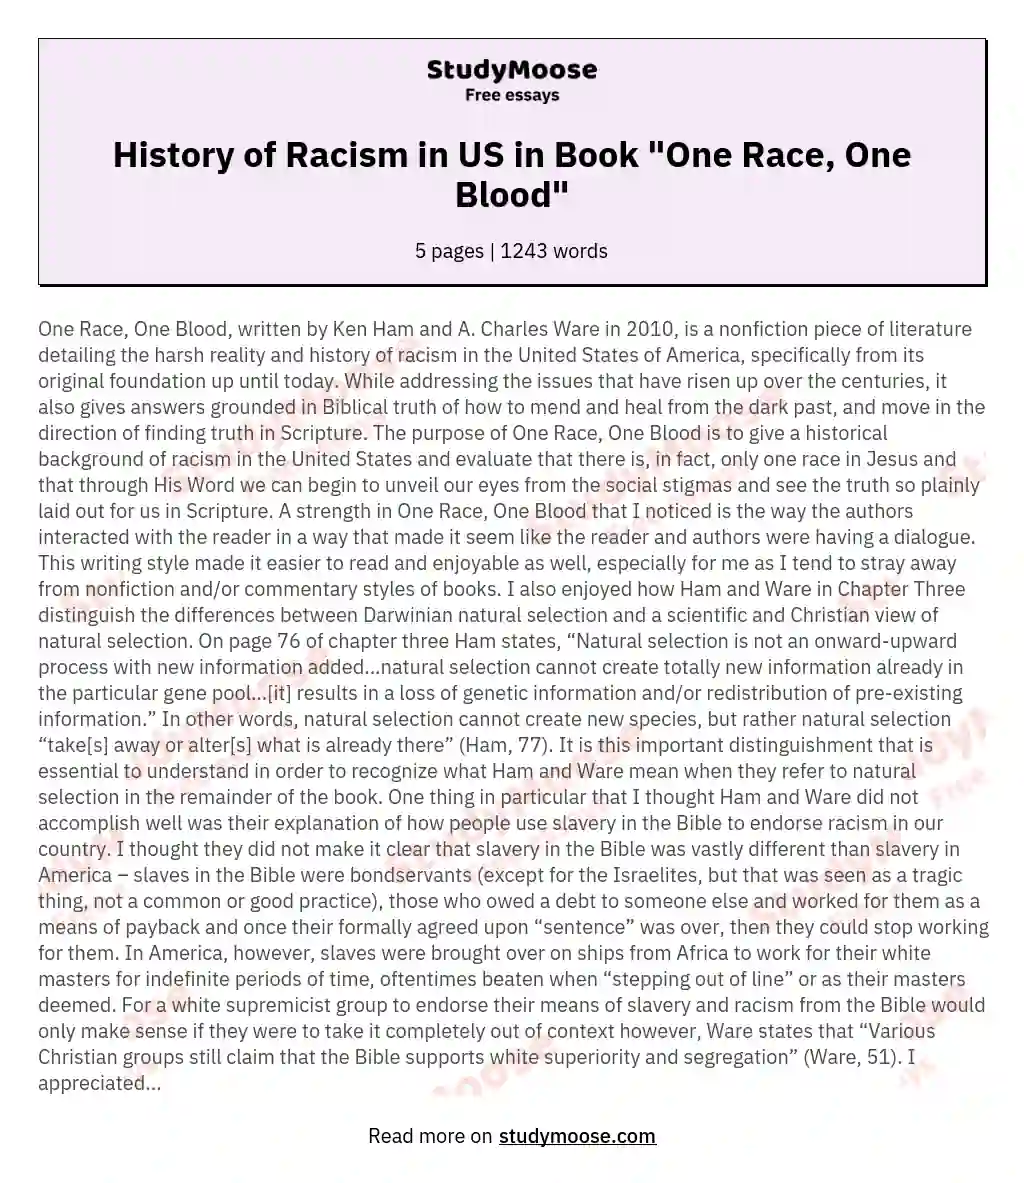 History of Racism in US in Book "One Race, One Blood" essay